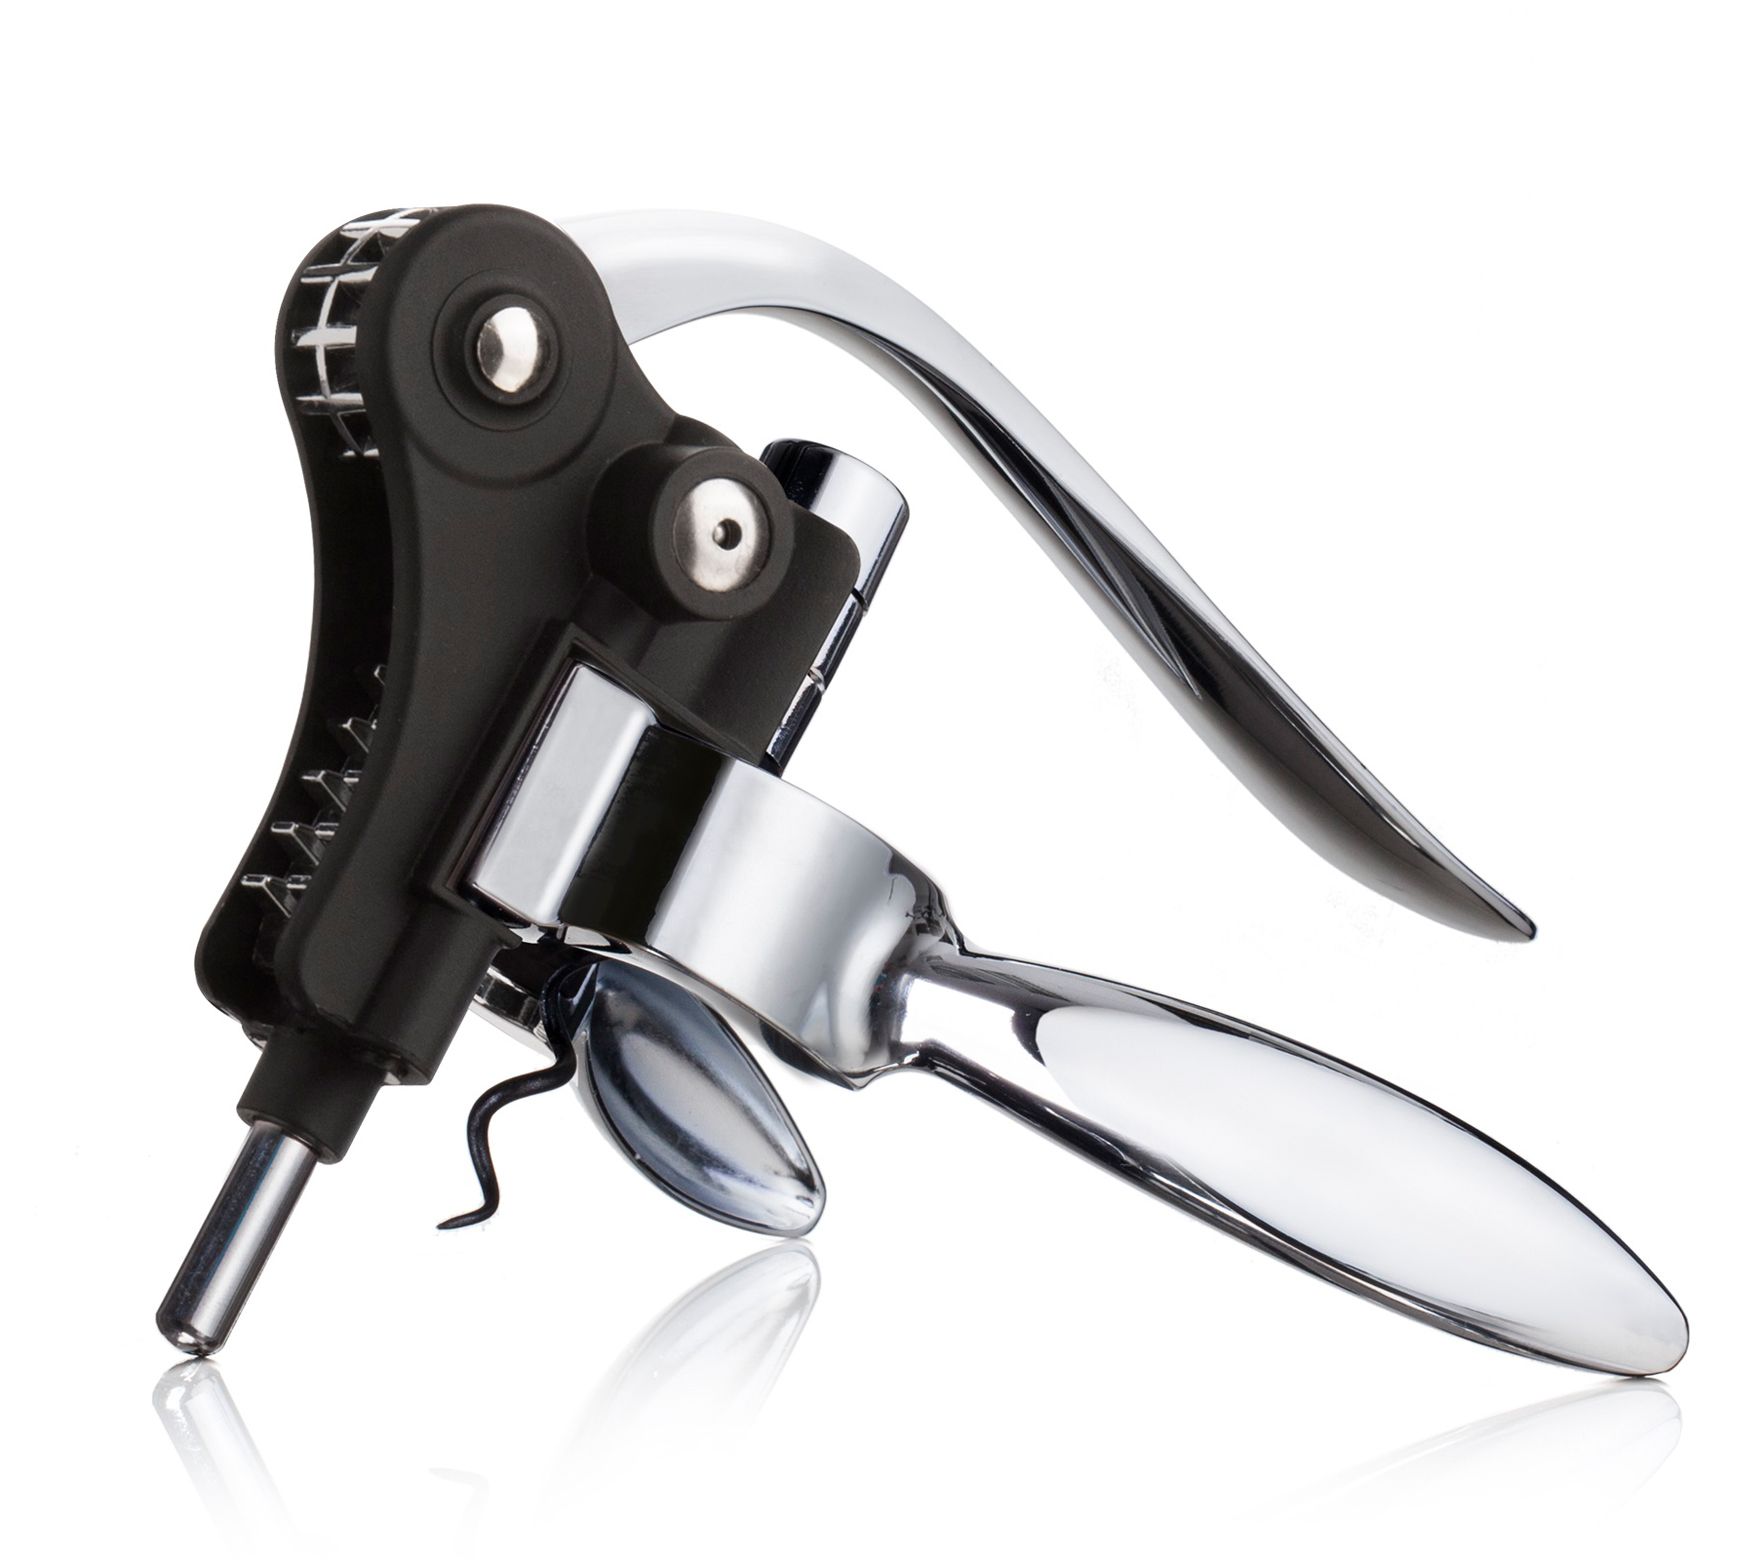  OXO Steel Vertical Lever Corkscrew with Removable Foil